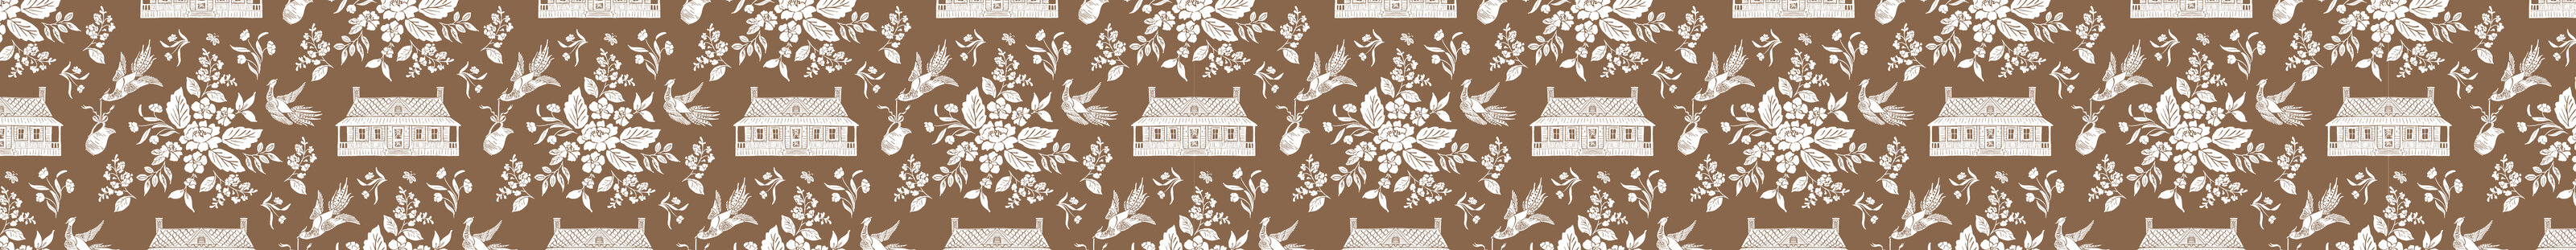 Brown and white toile background